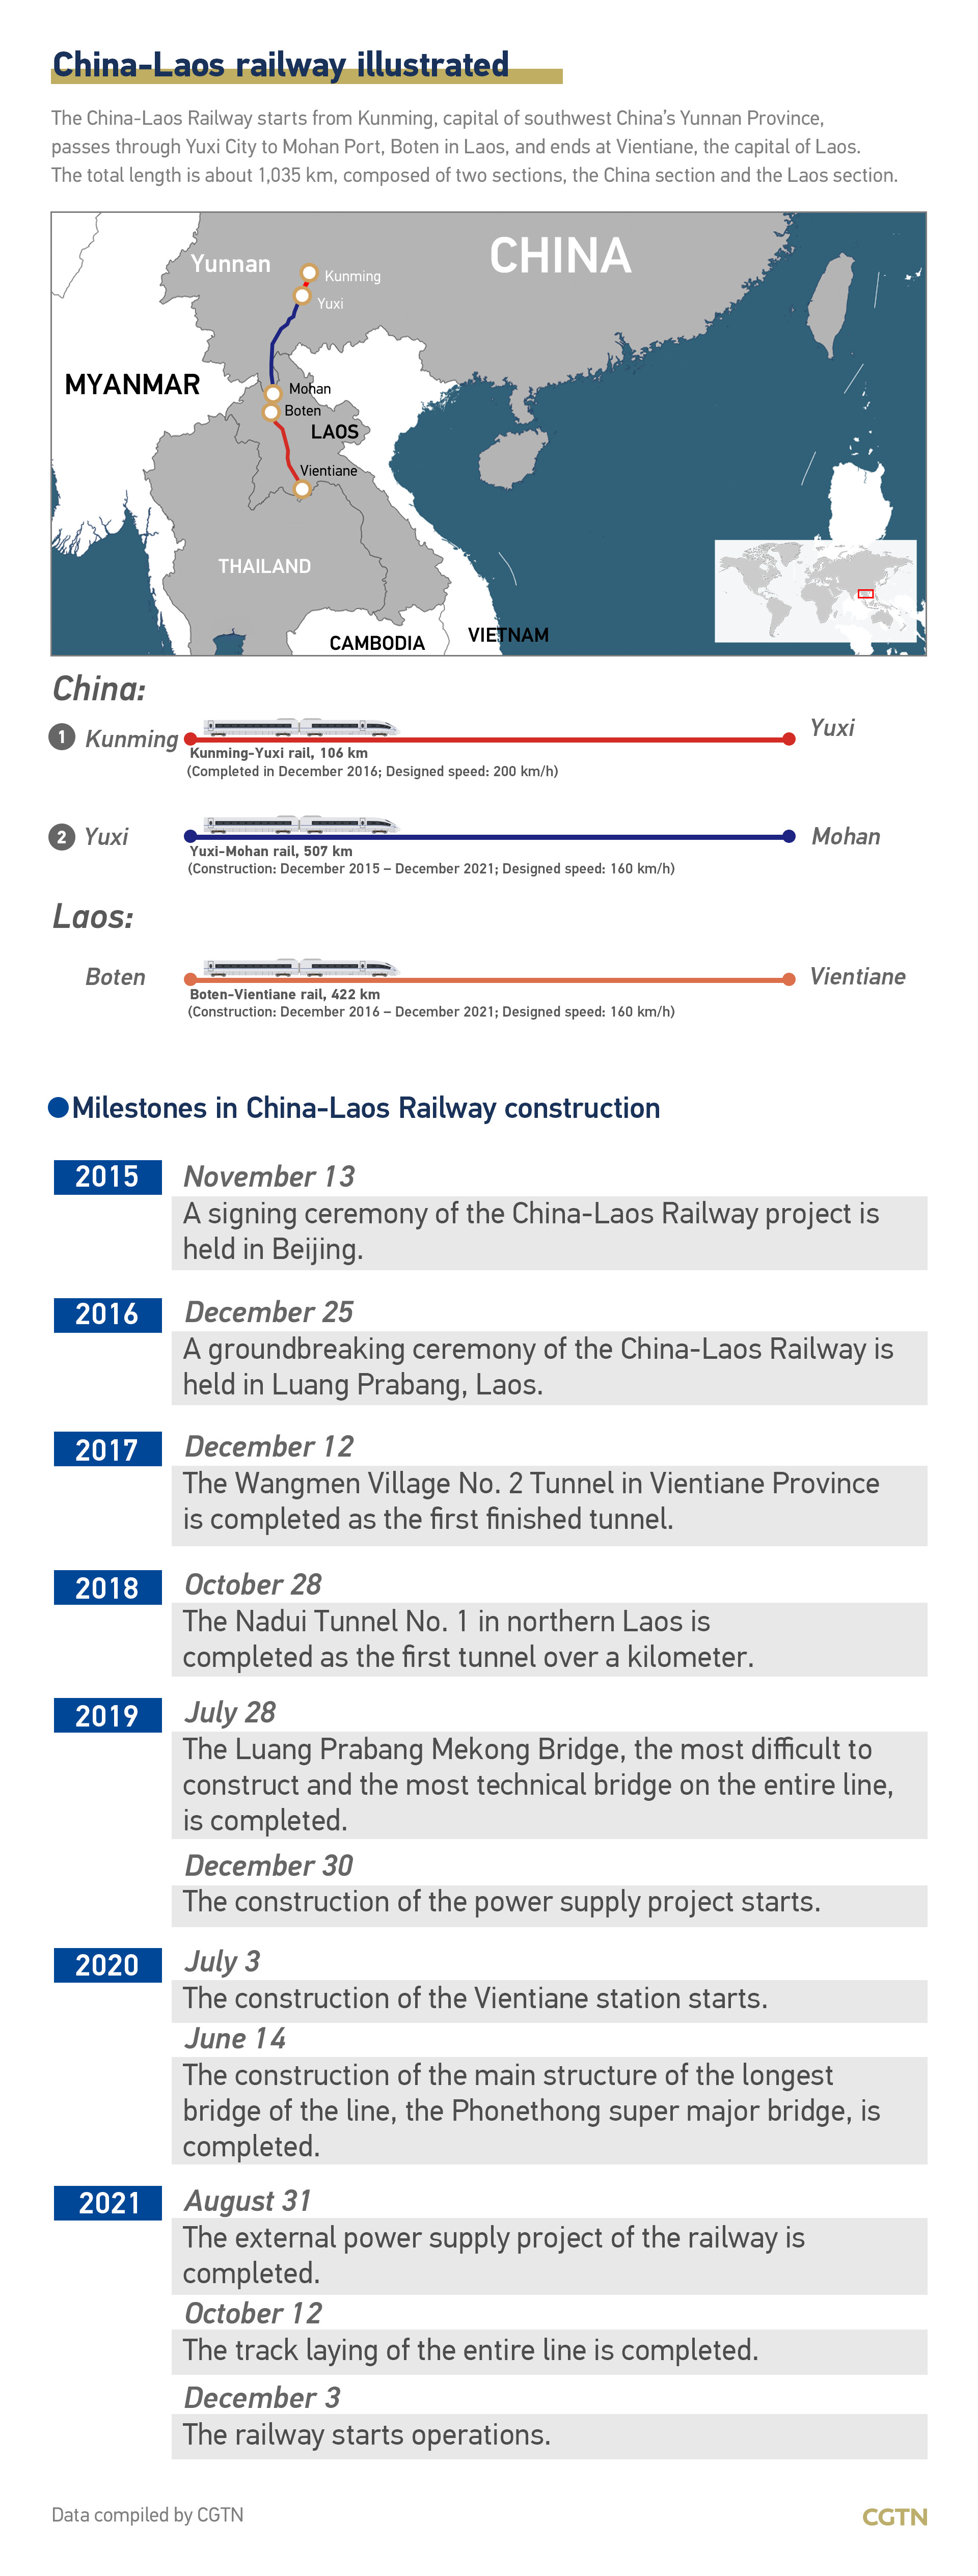 First anniversary of China-Laos Railway: What changes has it brought to Laos?